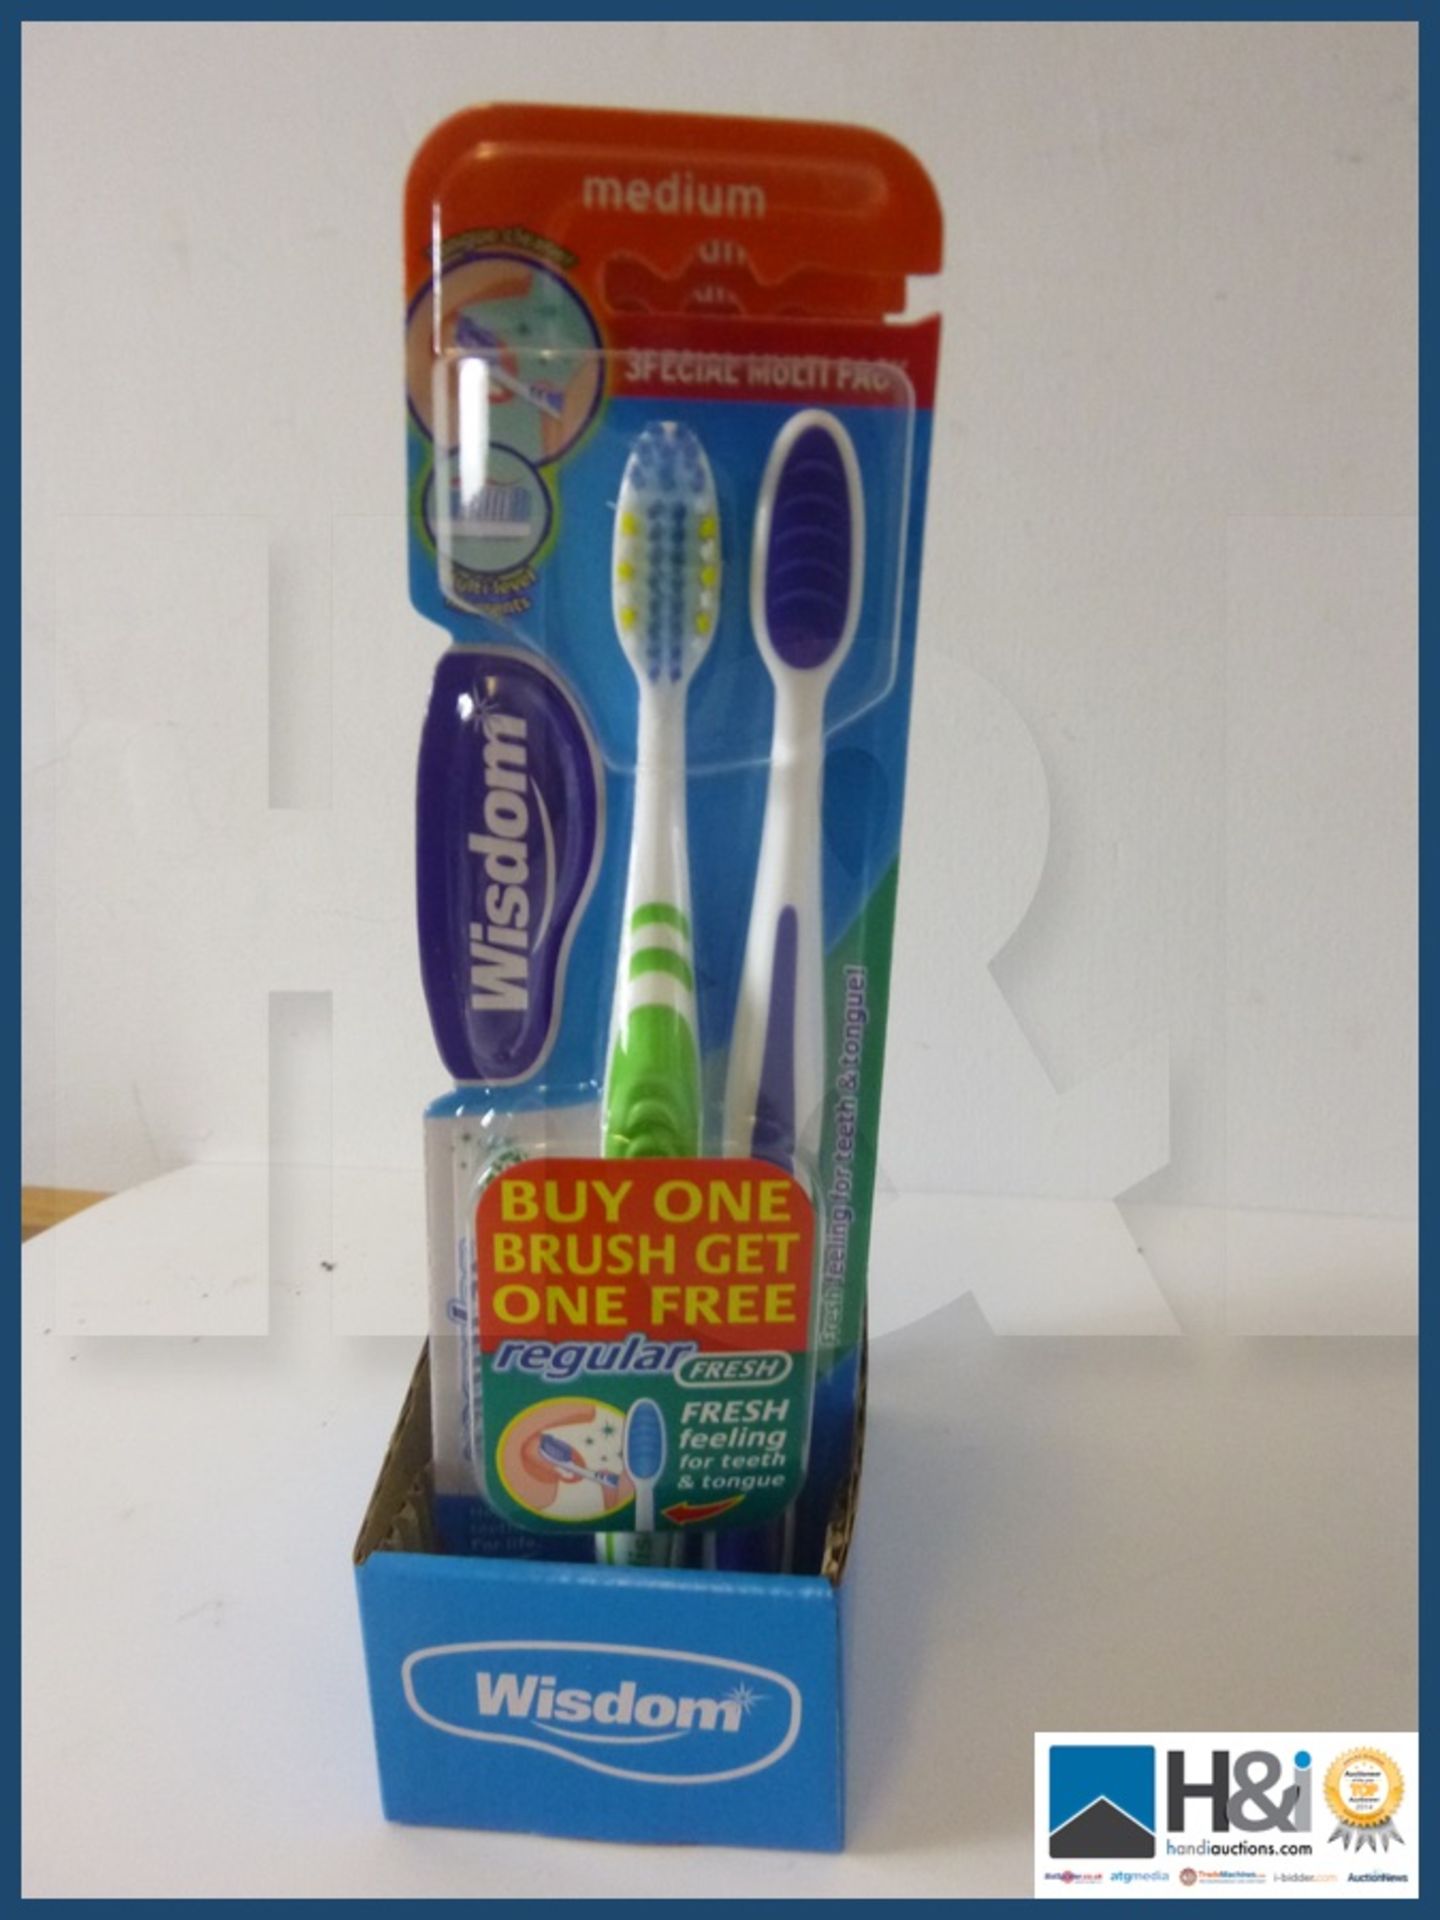 Lot of new Wisdom toothbrushes 6 adult twin packs and 6 children's twin packs . - Image 3 of 4